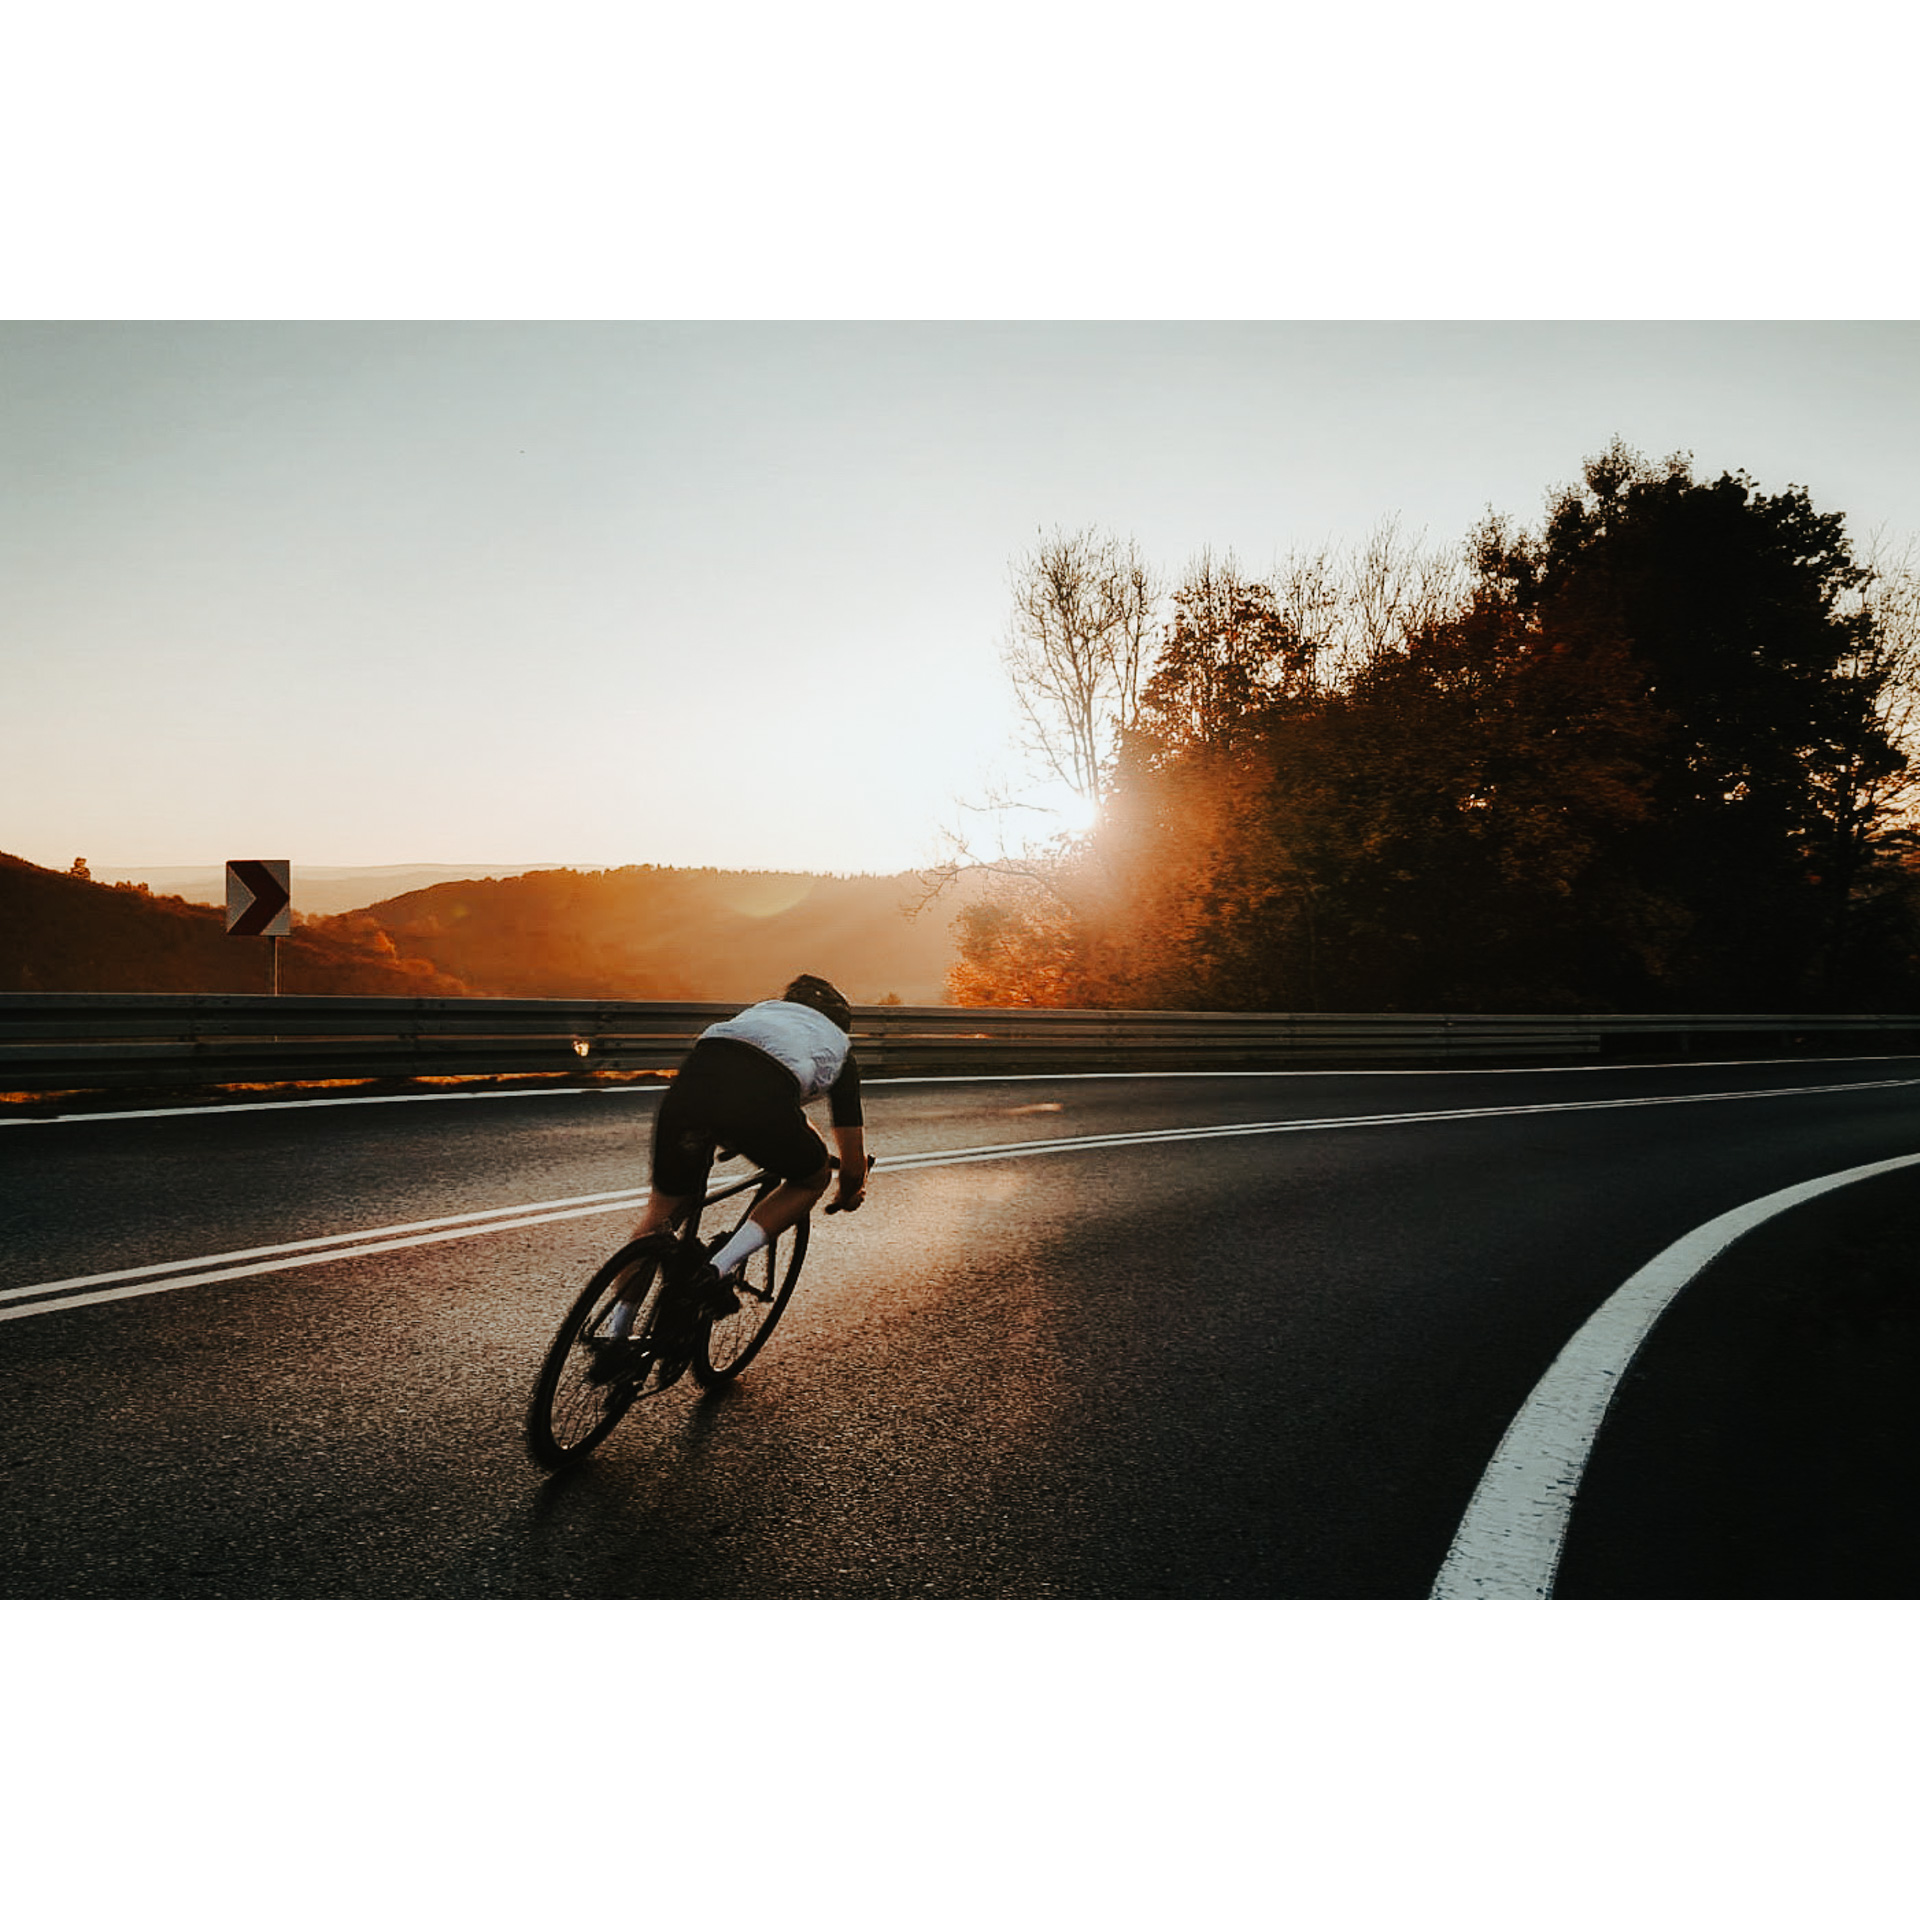 A cyclist in a white T-shirt and black cycling shorts riding on a wide, asphalt road with visible stripes against the setting sun